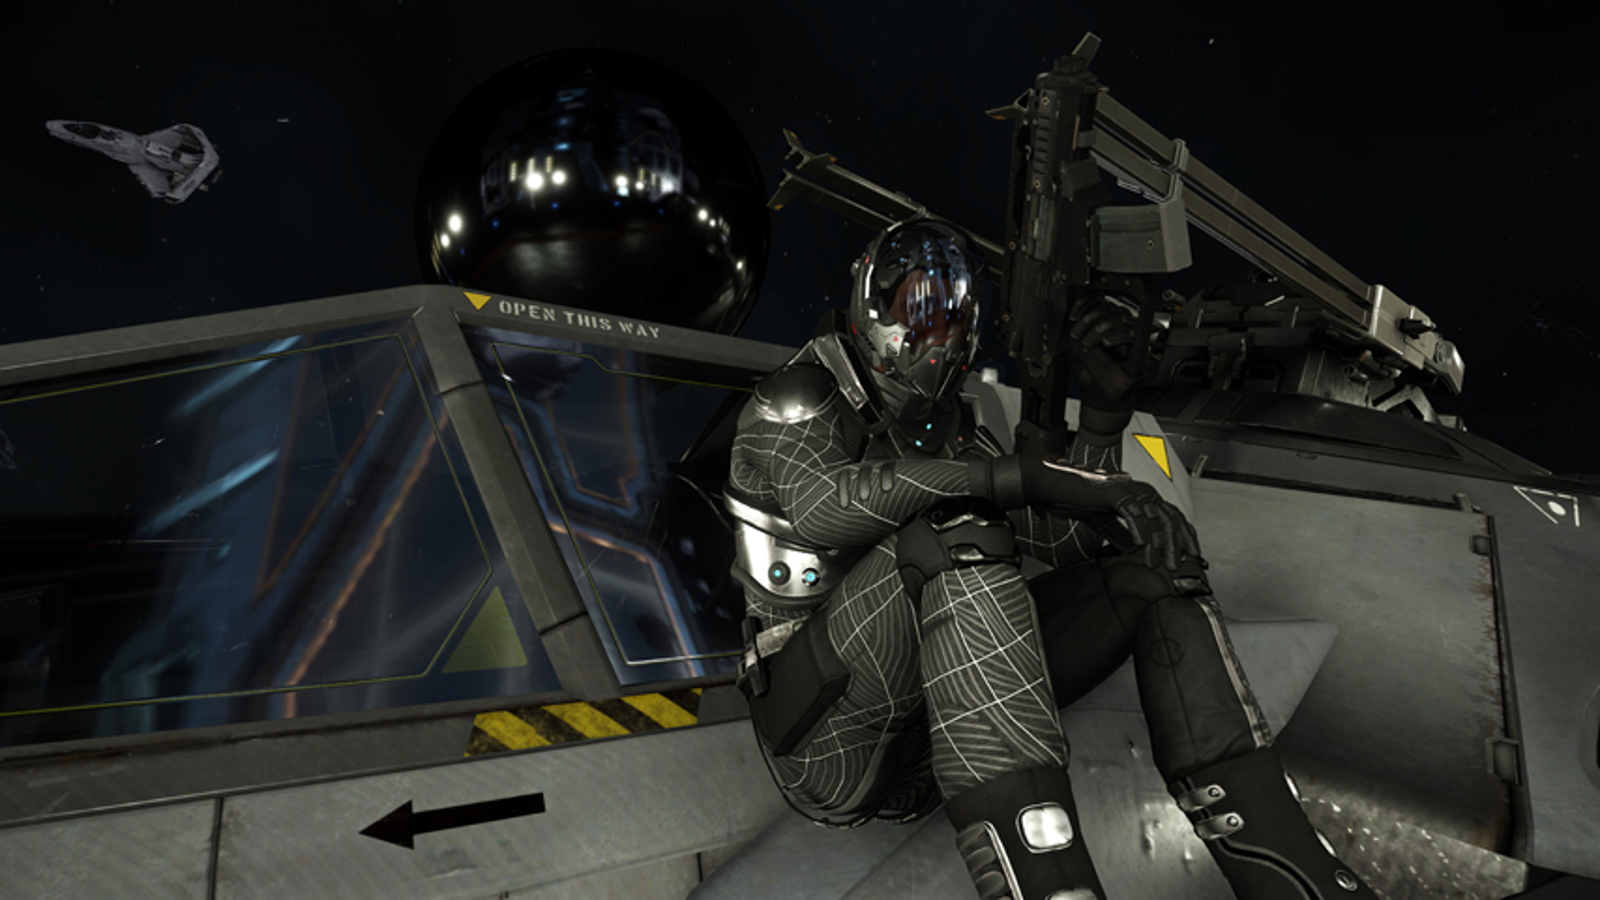 Star Citizen first-person shooter gameplay unveiled